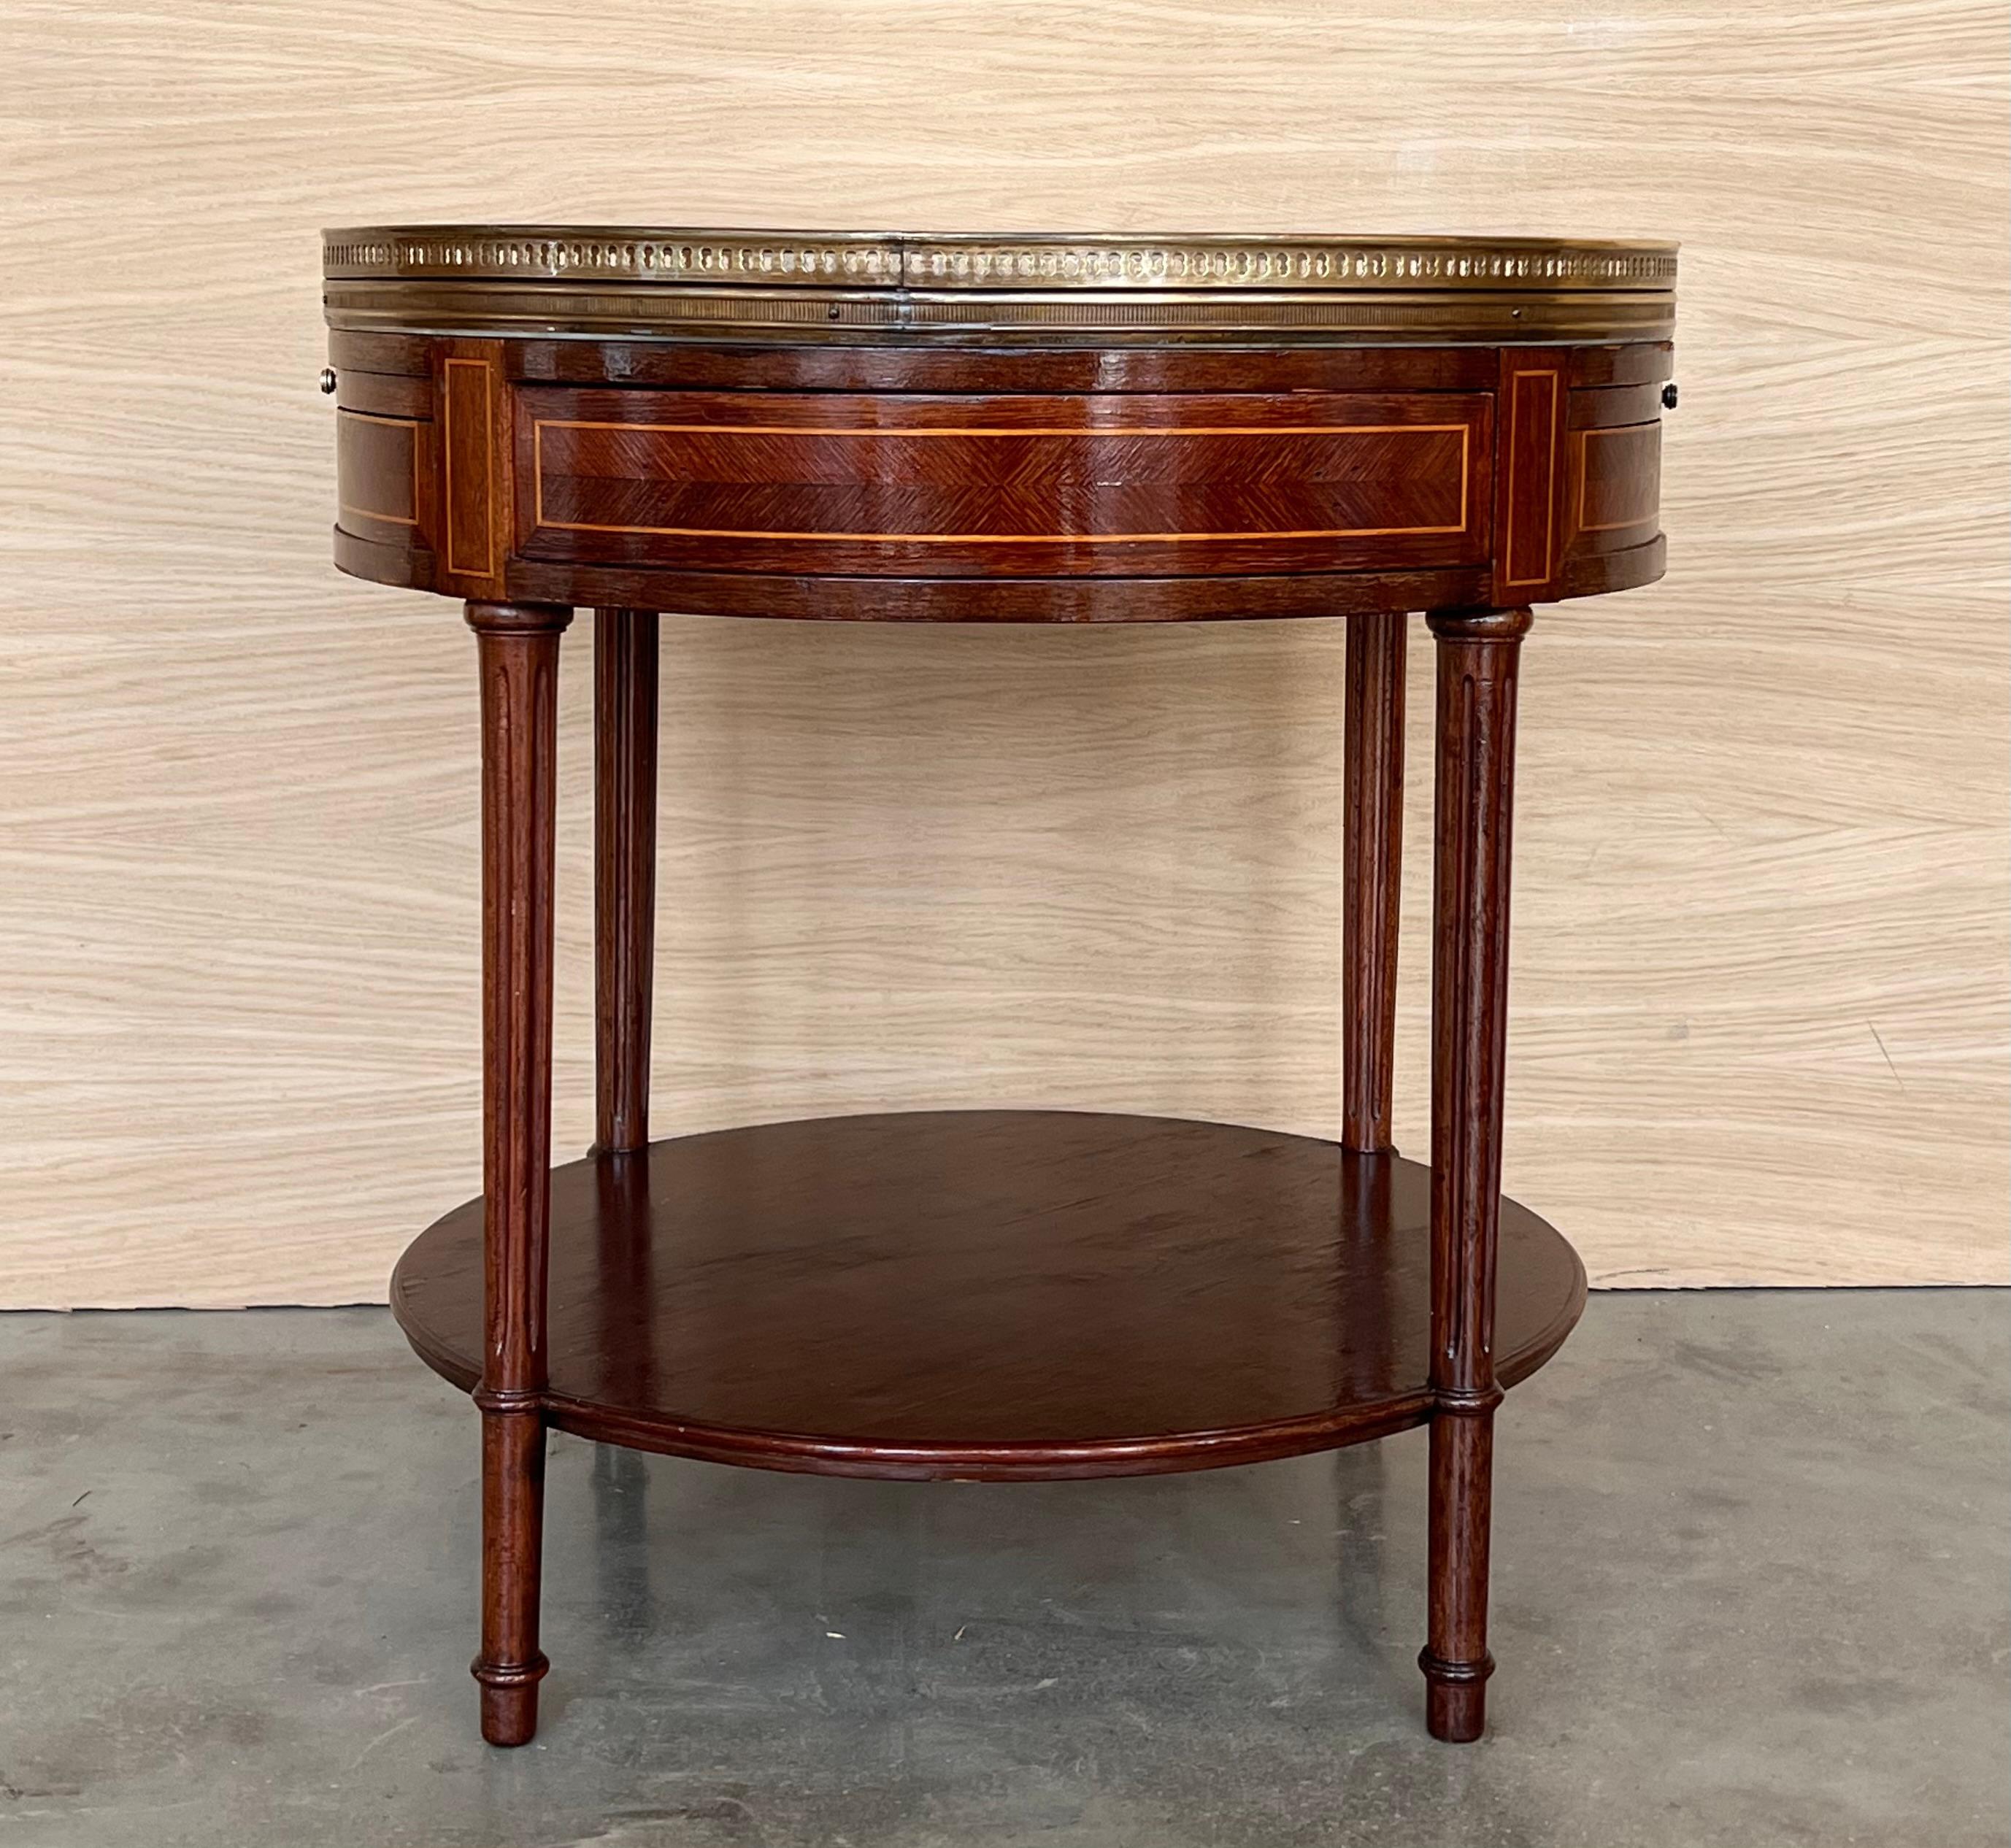 A French Louis XVI style neoclassical nightstand, with a pierced brass gallery and Bianco Carrara marble top, pull-out both trays, single hidden drawer and lower shelf. Perfect as an end table too!

Height from the floor to the low shelve : 5-9in